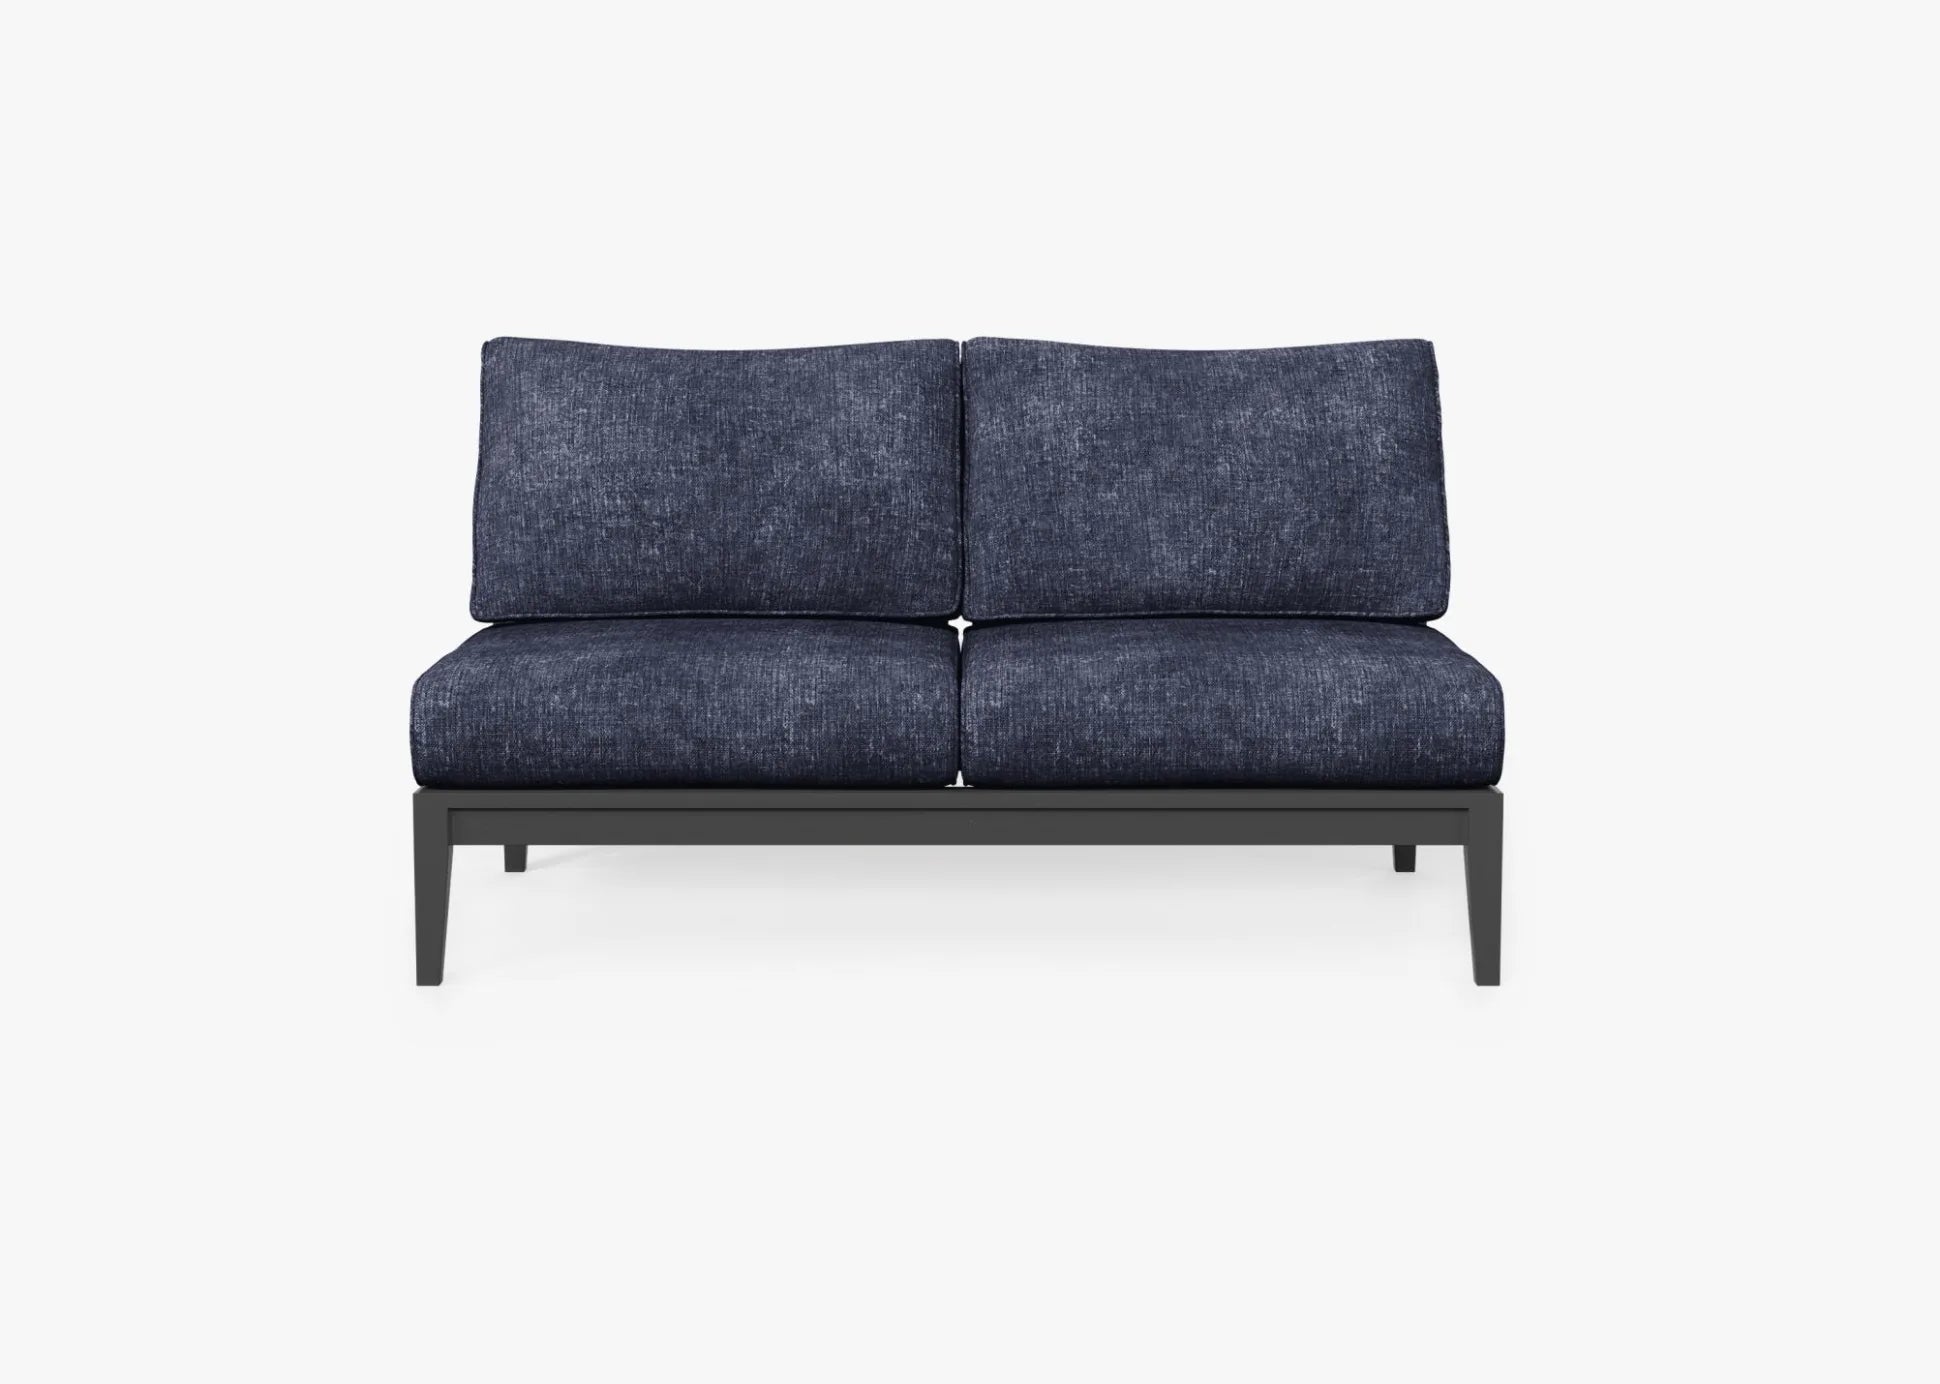 Live Outer 58" Charcoal Aluminum Outdoor Armless Loveseat With Deep Sea Navy Cushion